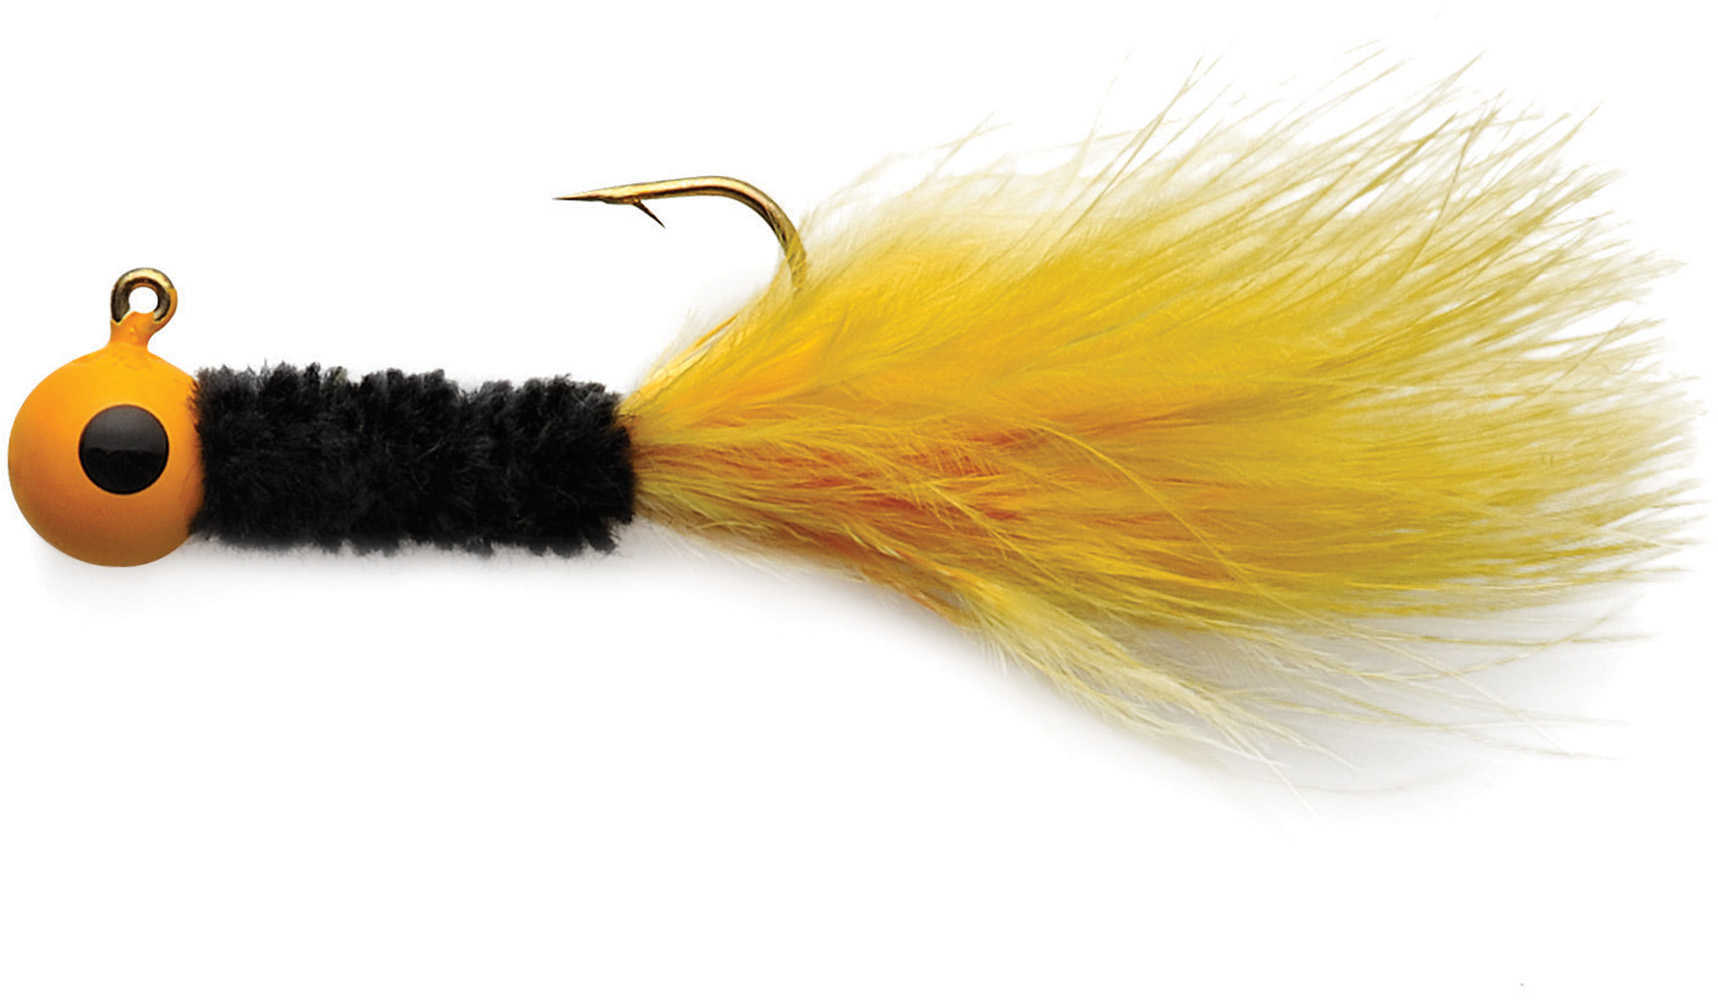 Eagle Claw Fishing Tackle Crappie Jig 1/16 oz Yellow-Black-Yellow Md: ECJC1/16-YBY